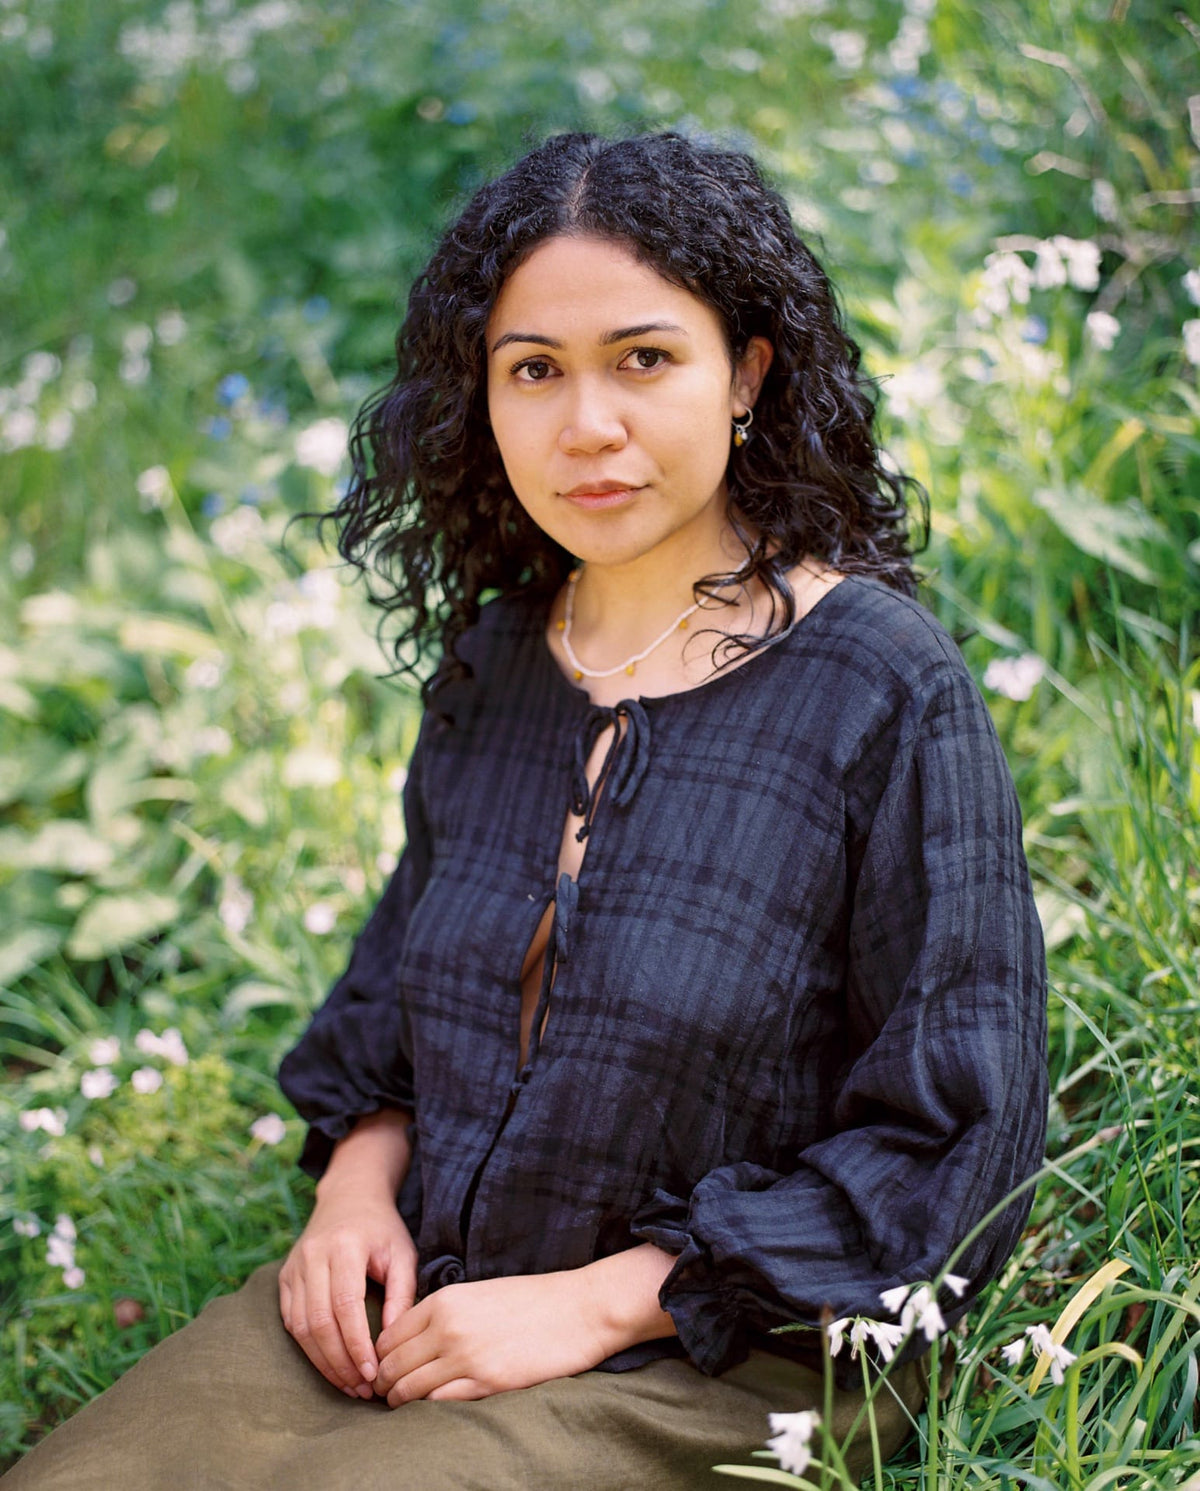 A woman in a black shirt wearing Kōwhai Sleepers by Avara Studio, sitting in the grass.